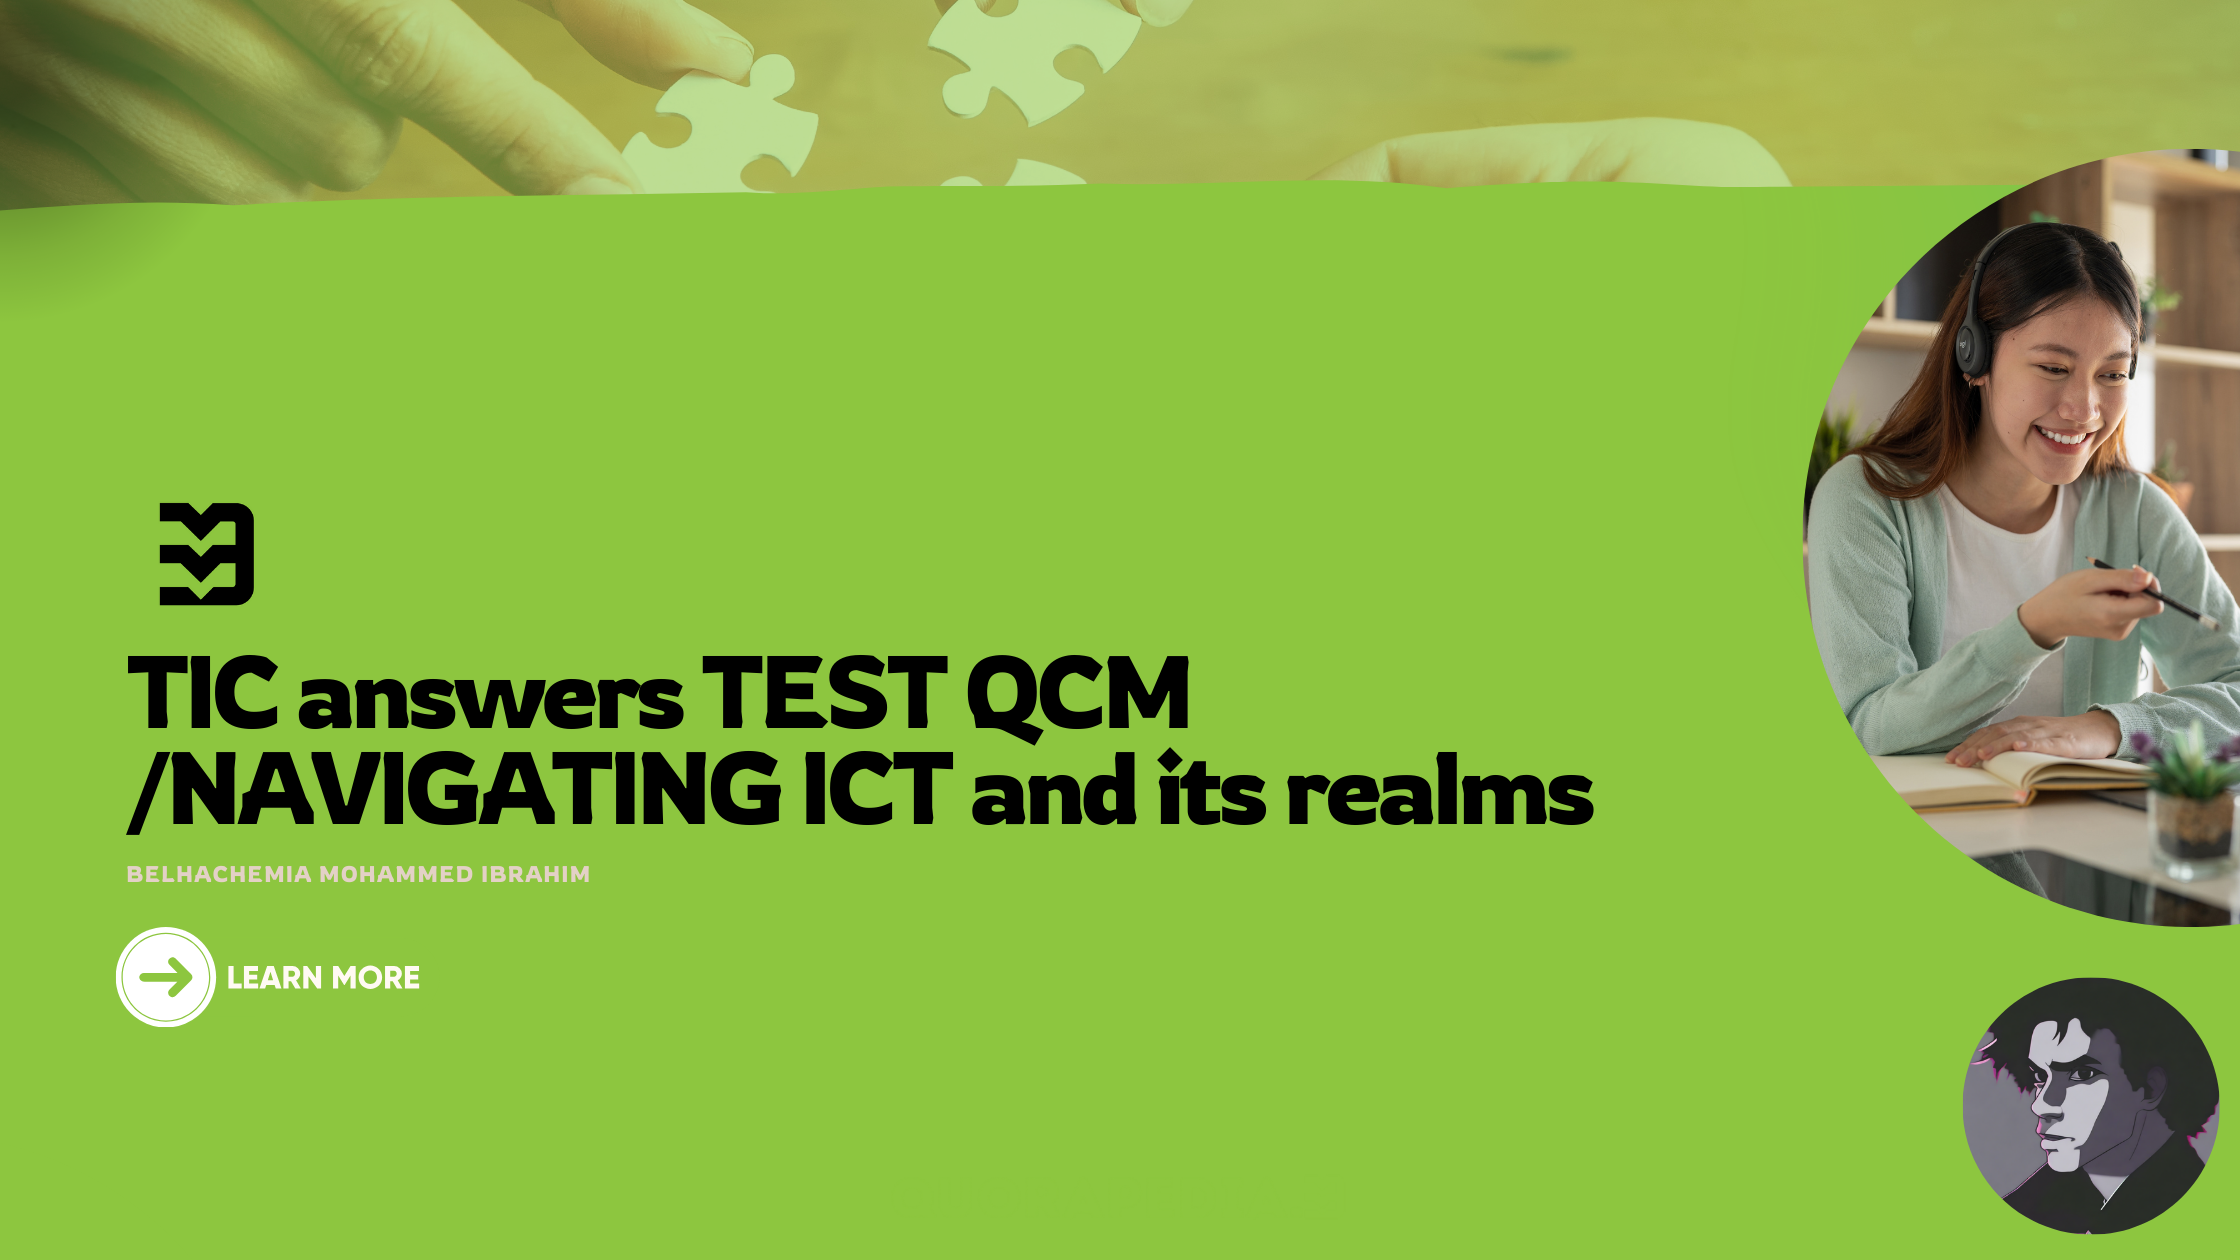 TIC answers TEST QCM /NAVIGATING ICT and its realms